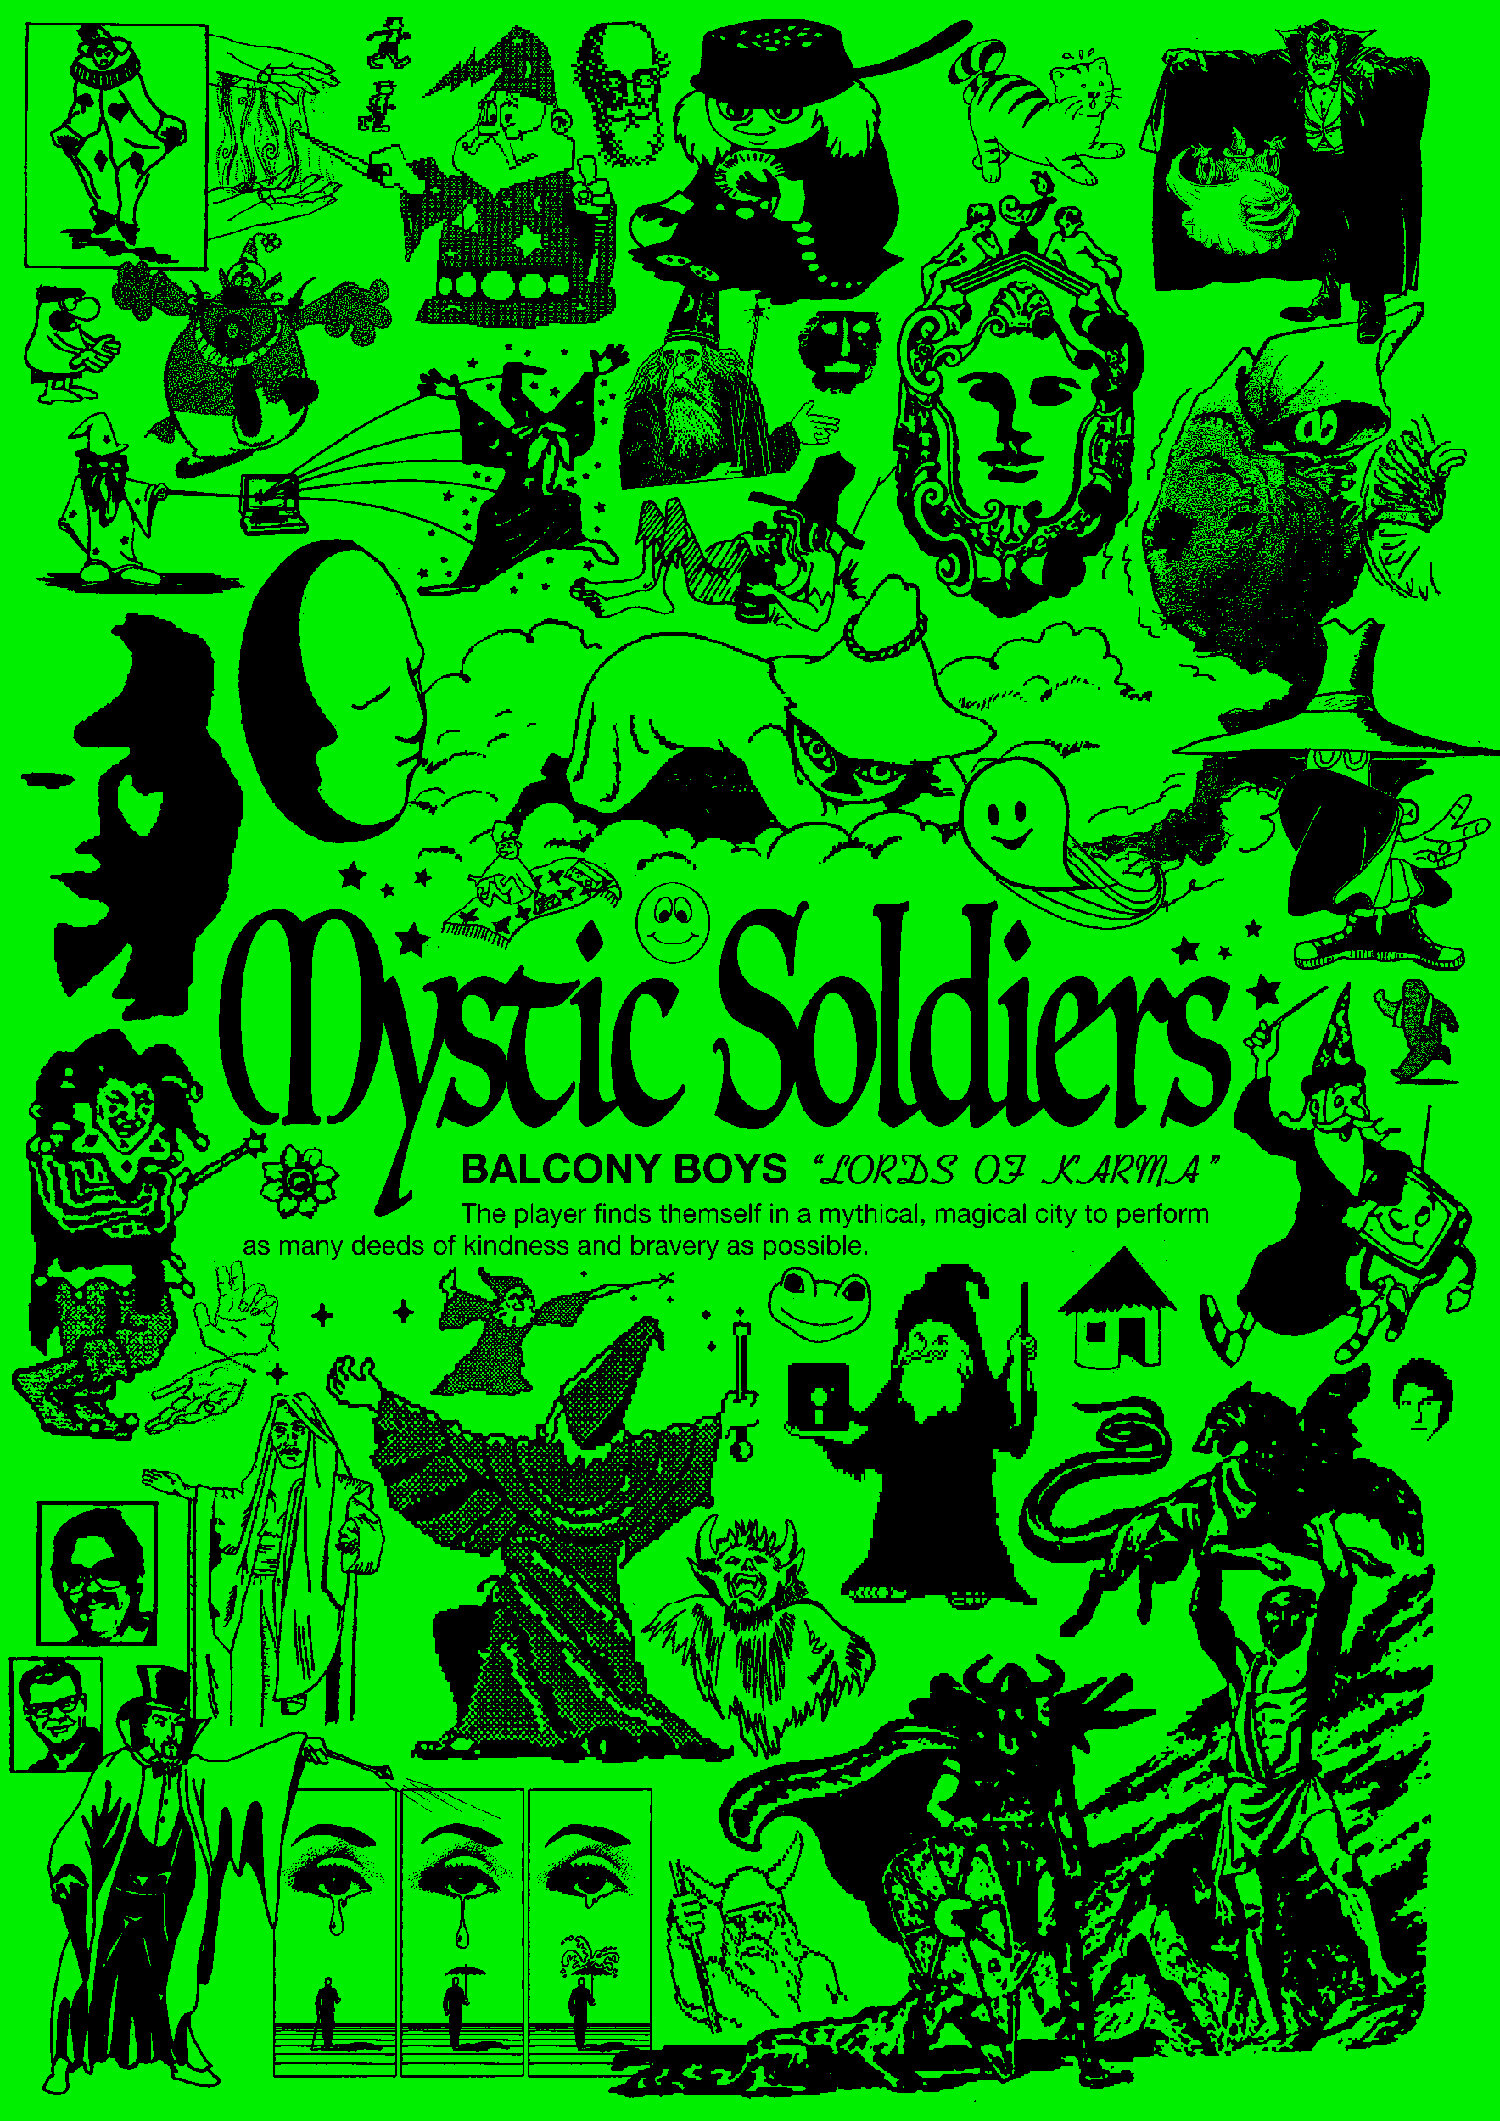 MYSTIC SOLDIERS POSTER